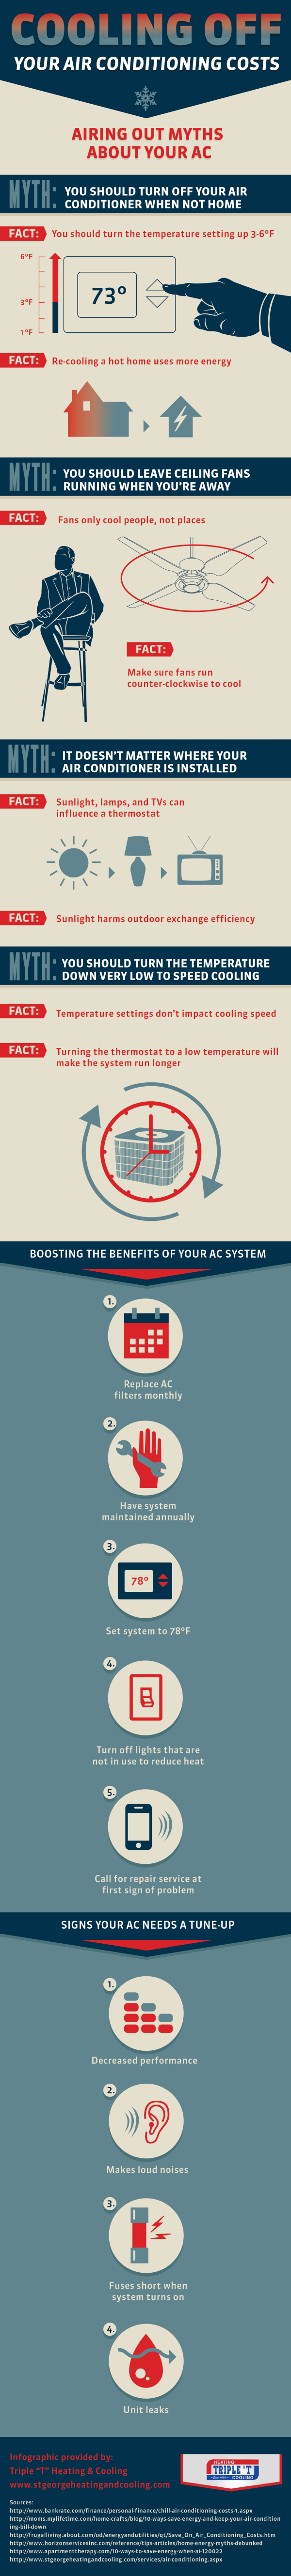 Cooling-Off-Your-Air-Conditioning-Costs-INFOGRAPHIC